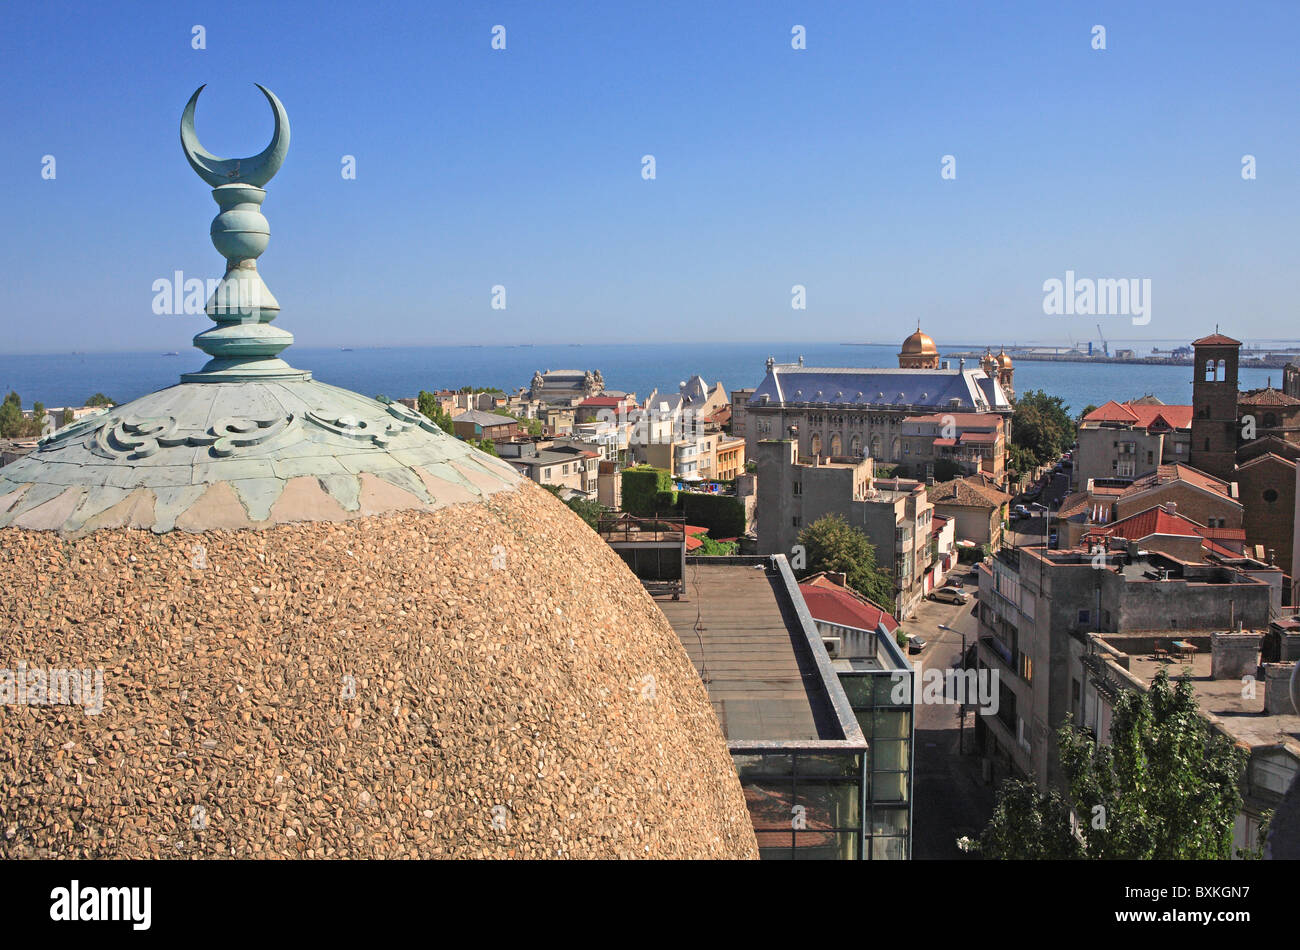 Romania, Constanta, From The Great Mosque Stock Photo